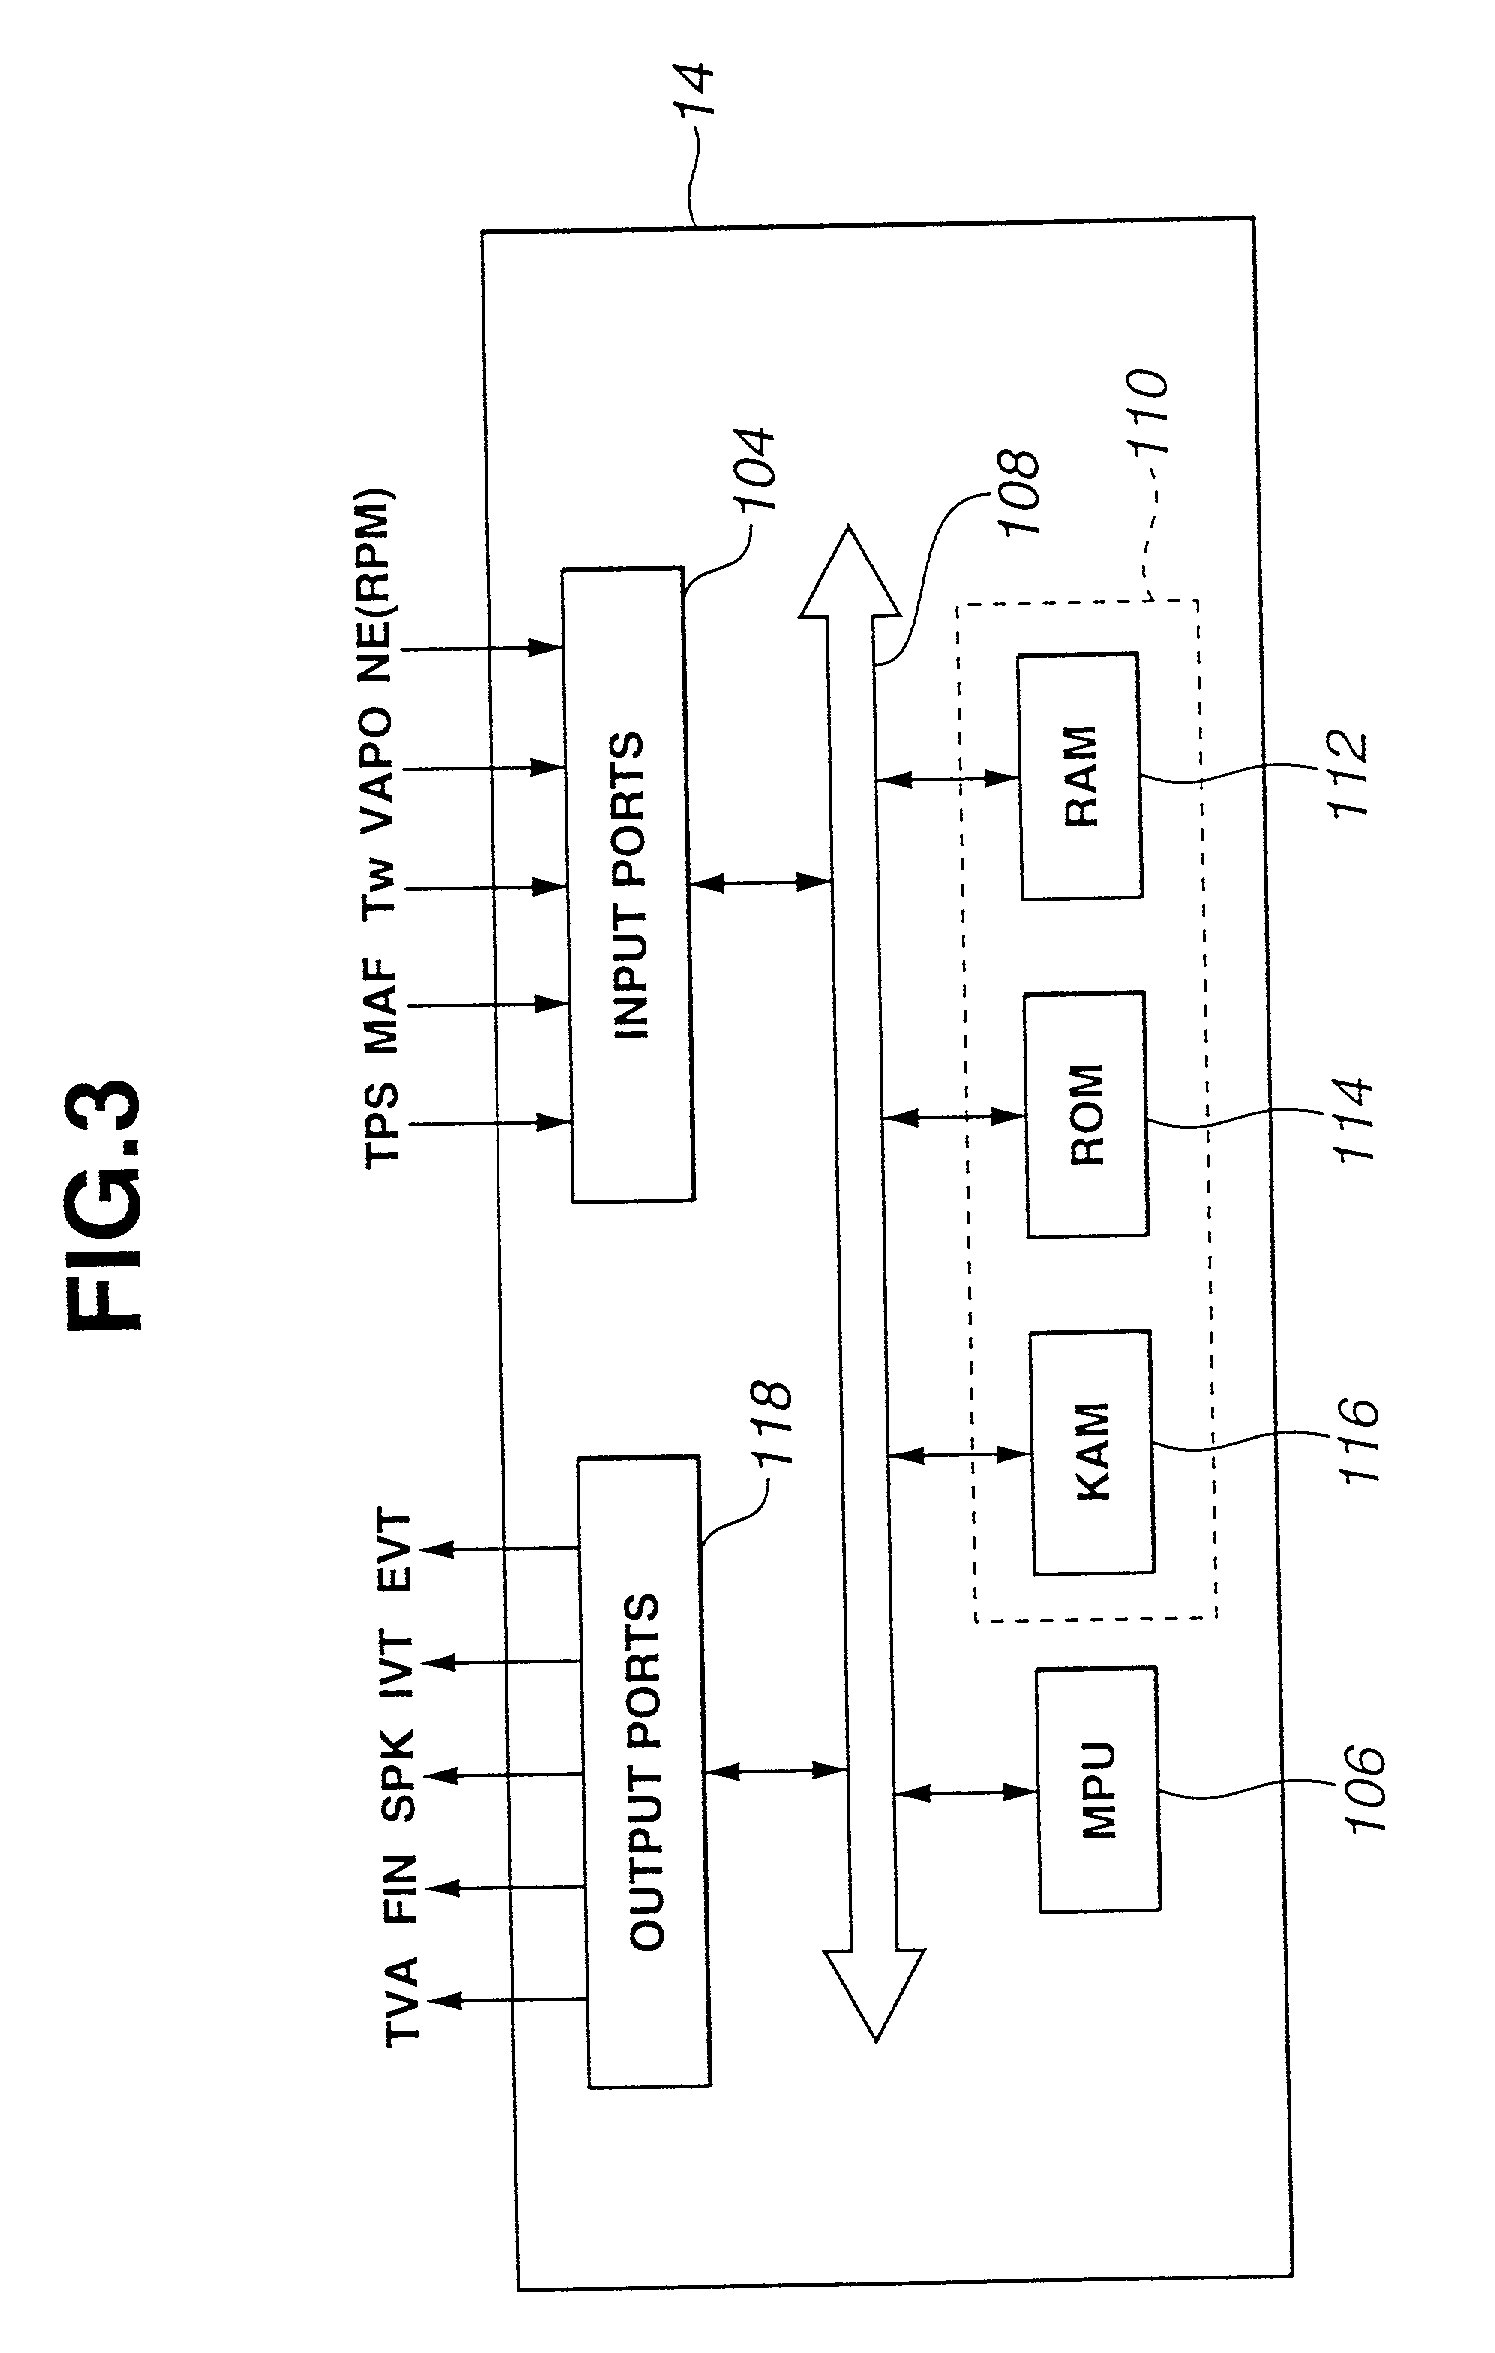 Coordinated valve timing and throttle control for controlling intake air